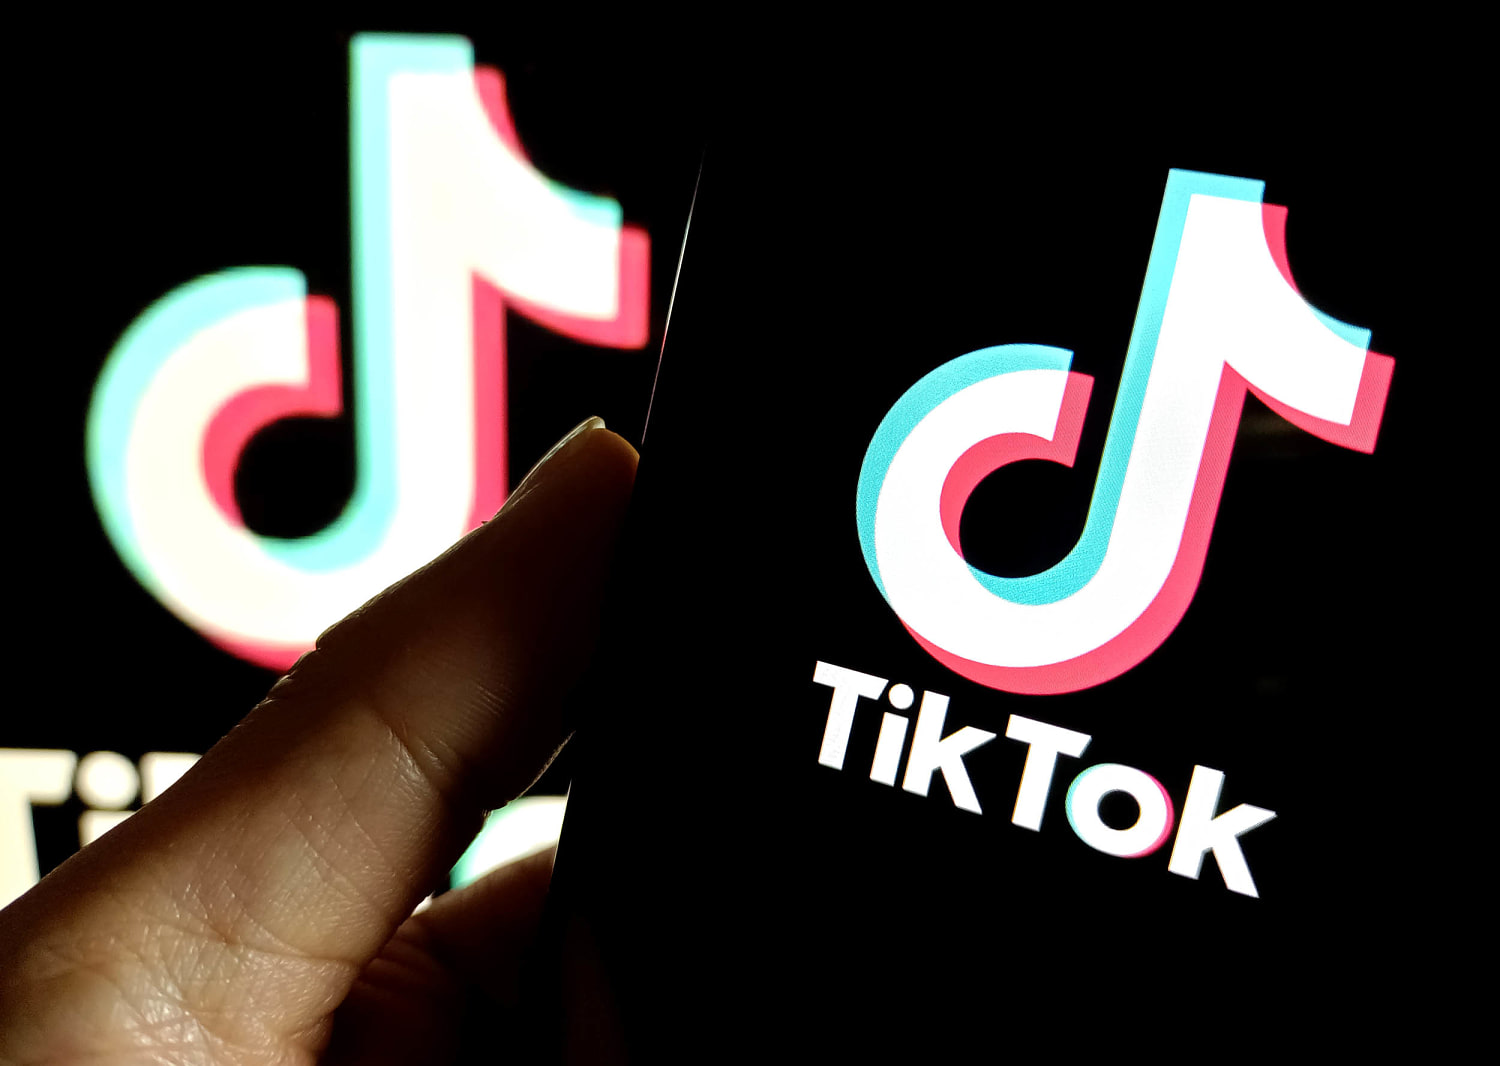 Nearly half the adults in this group are using TikTok, a survey finds